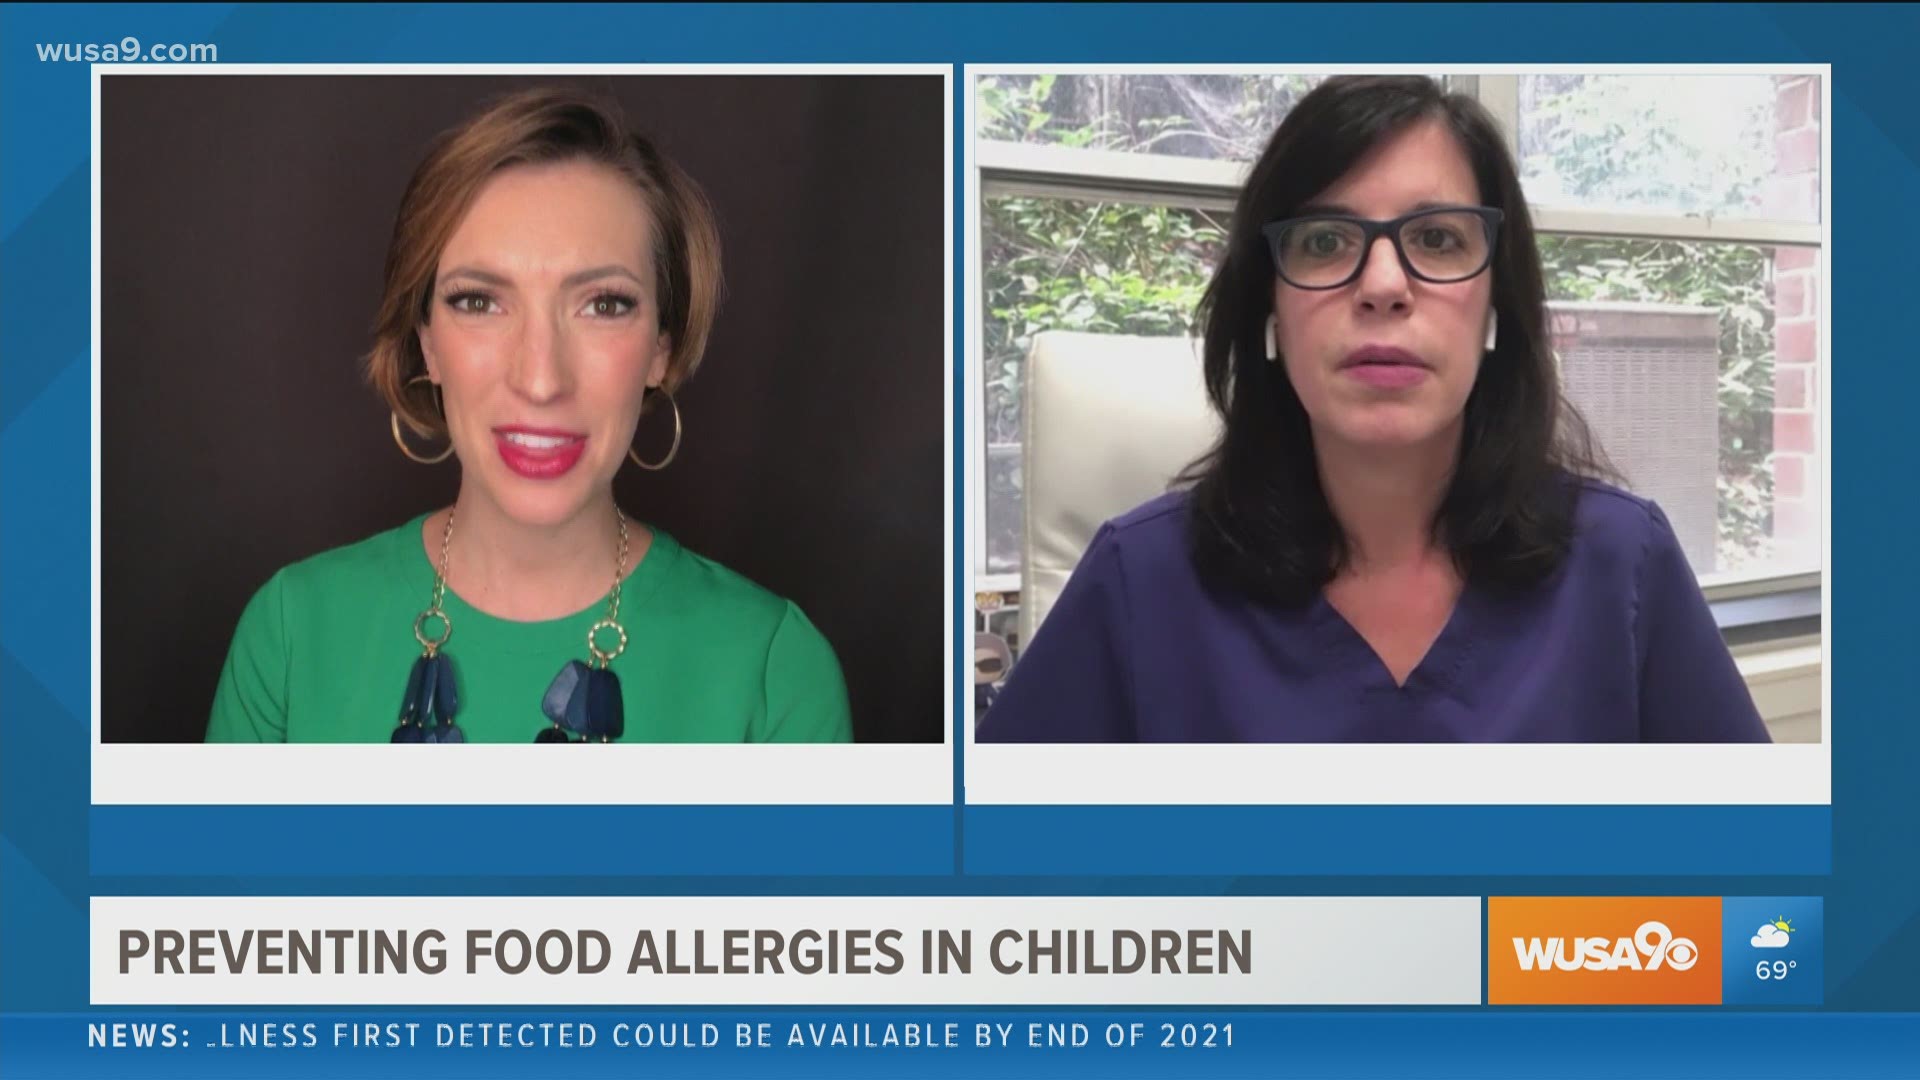 Dr. Dyan Hes shares tips on how to avoid and prevent food allergies in children.